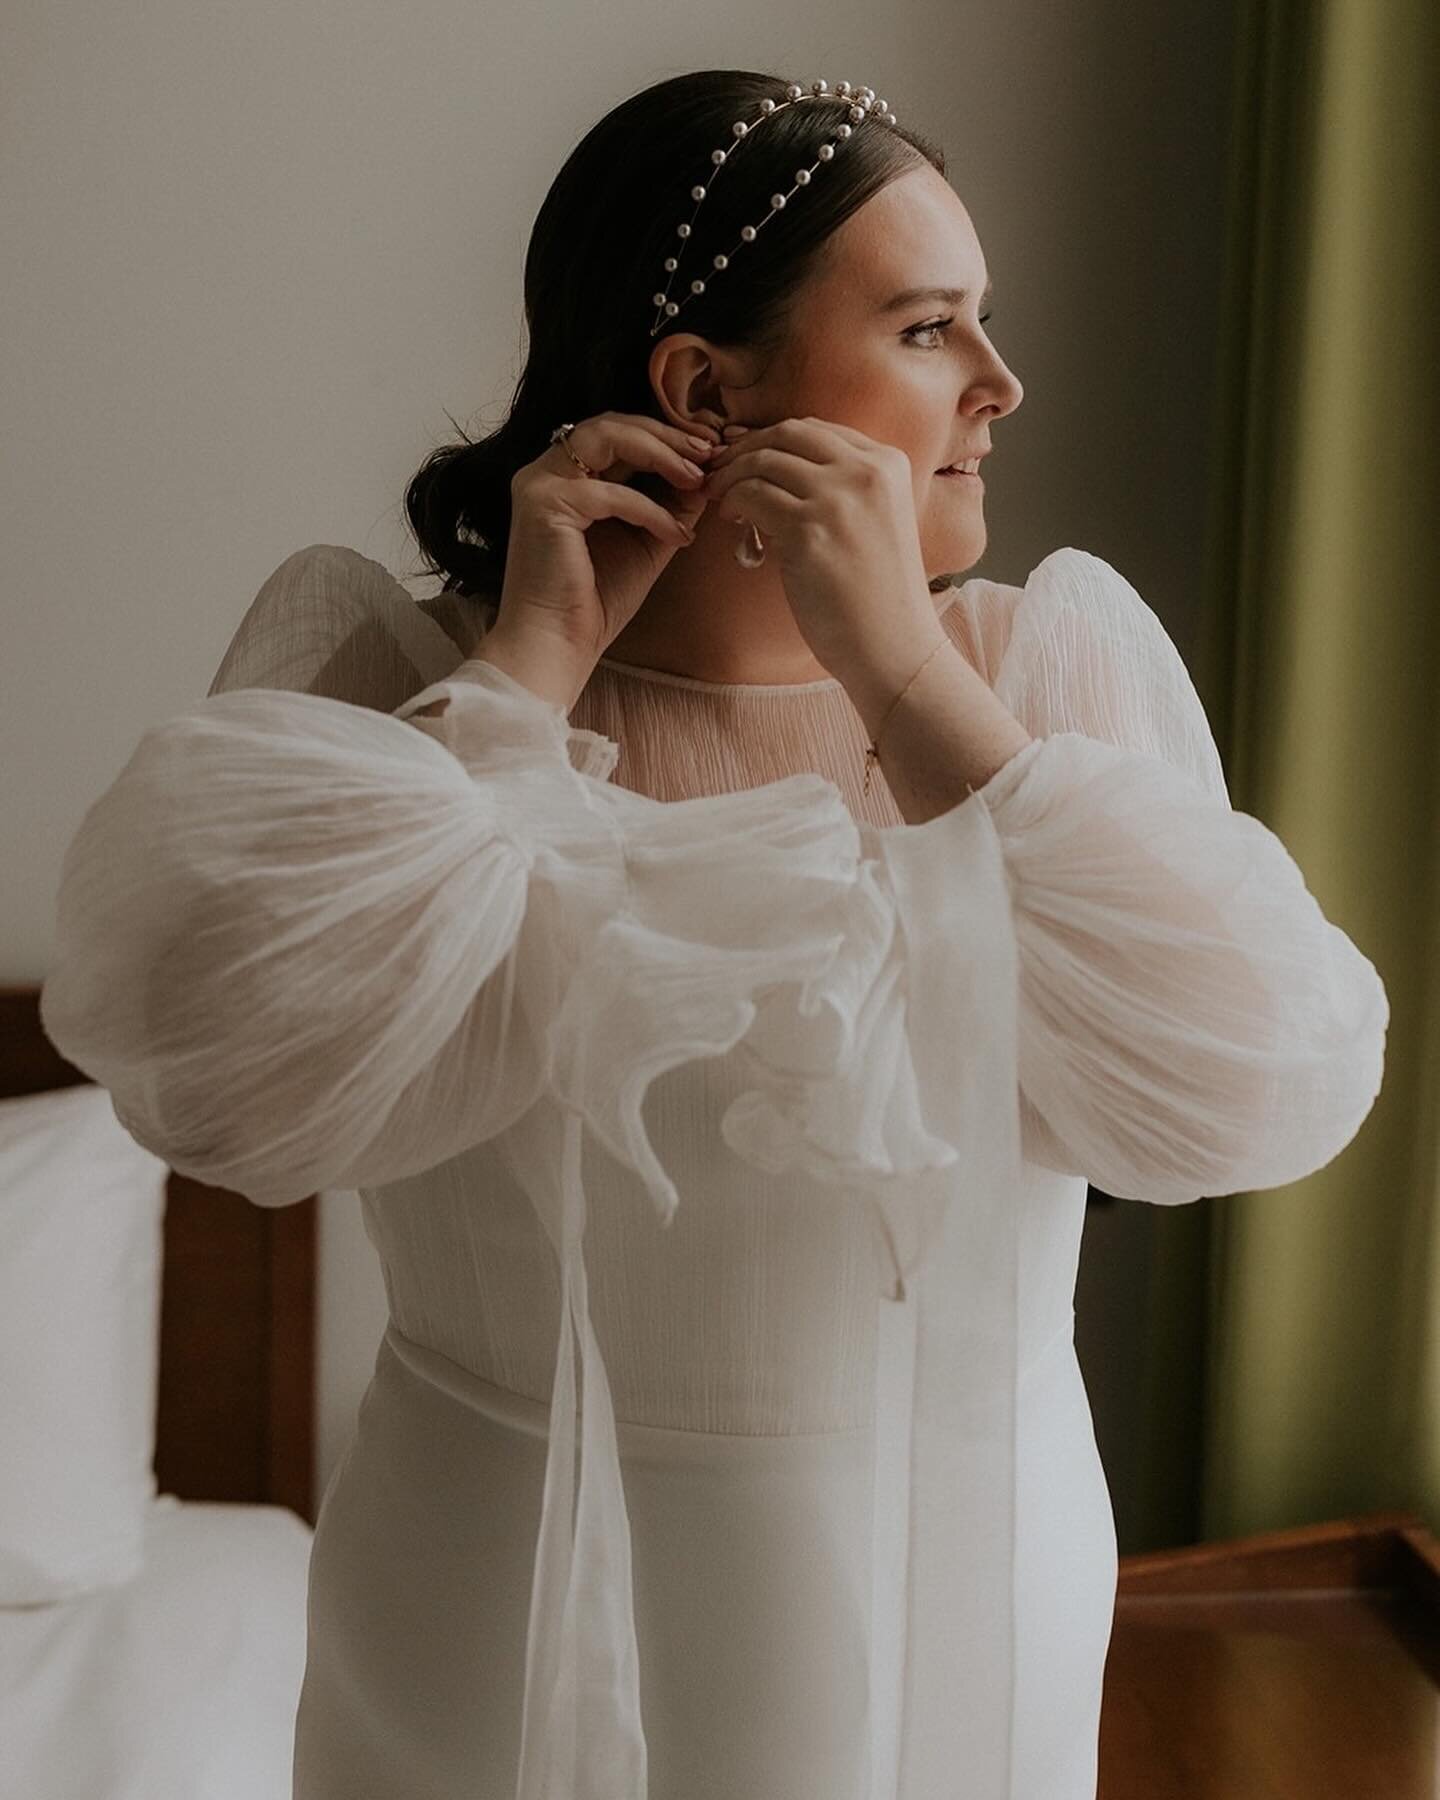 SISTINE // beautiful photos of #heartaflutterbride Beth wearing &ldquo;Sistine&rdquo; by @aeslingbride 🥂🎀 💕
These dreamy photos embody &lsquo;Town Hall Chic&rsquo; in every sense of the word! Swipe for divine styling inspo 👉
⠀⠀⠀⠀⠀⠀⠀⠀⠀
Photography